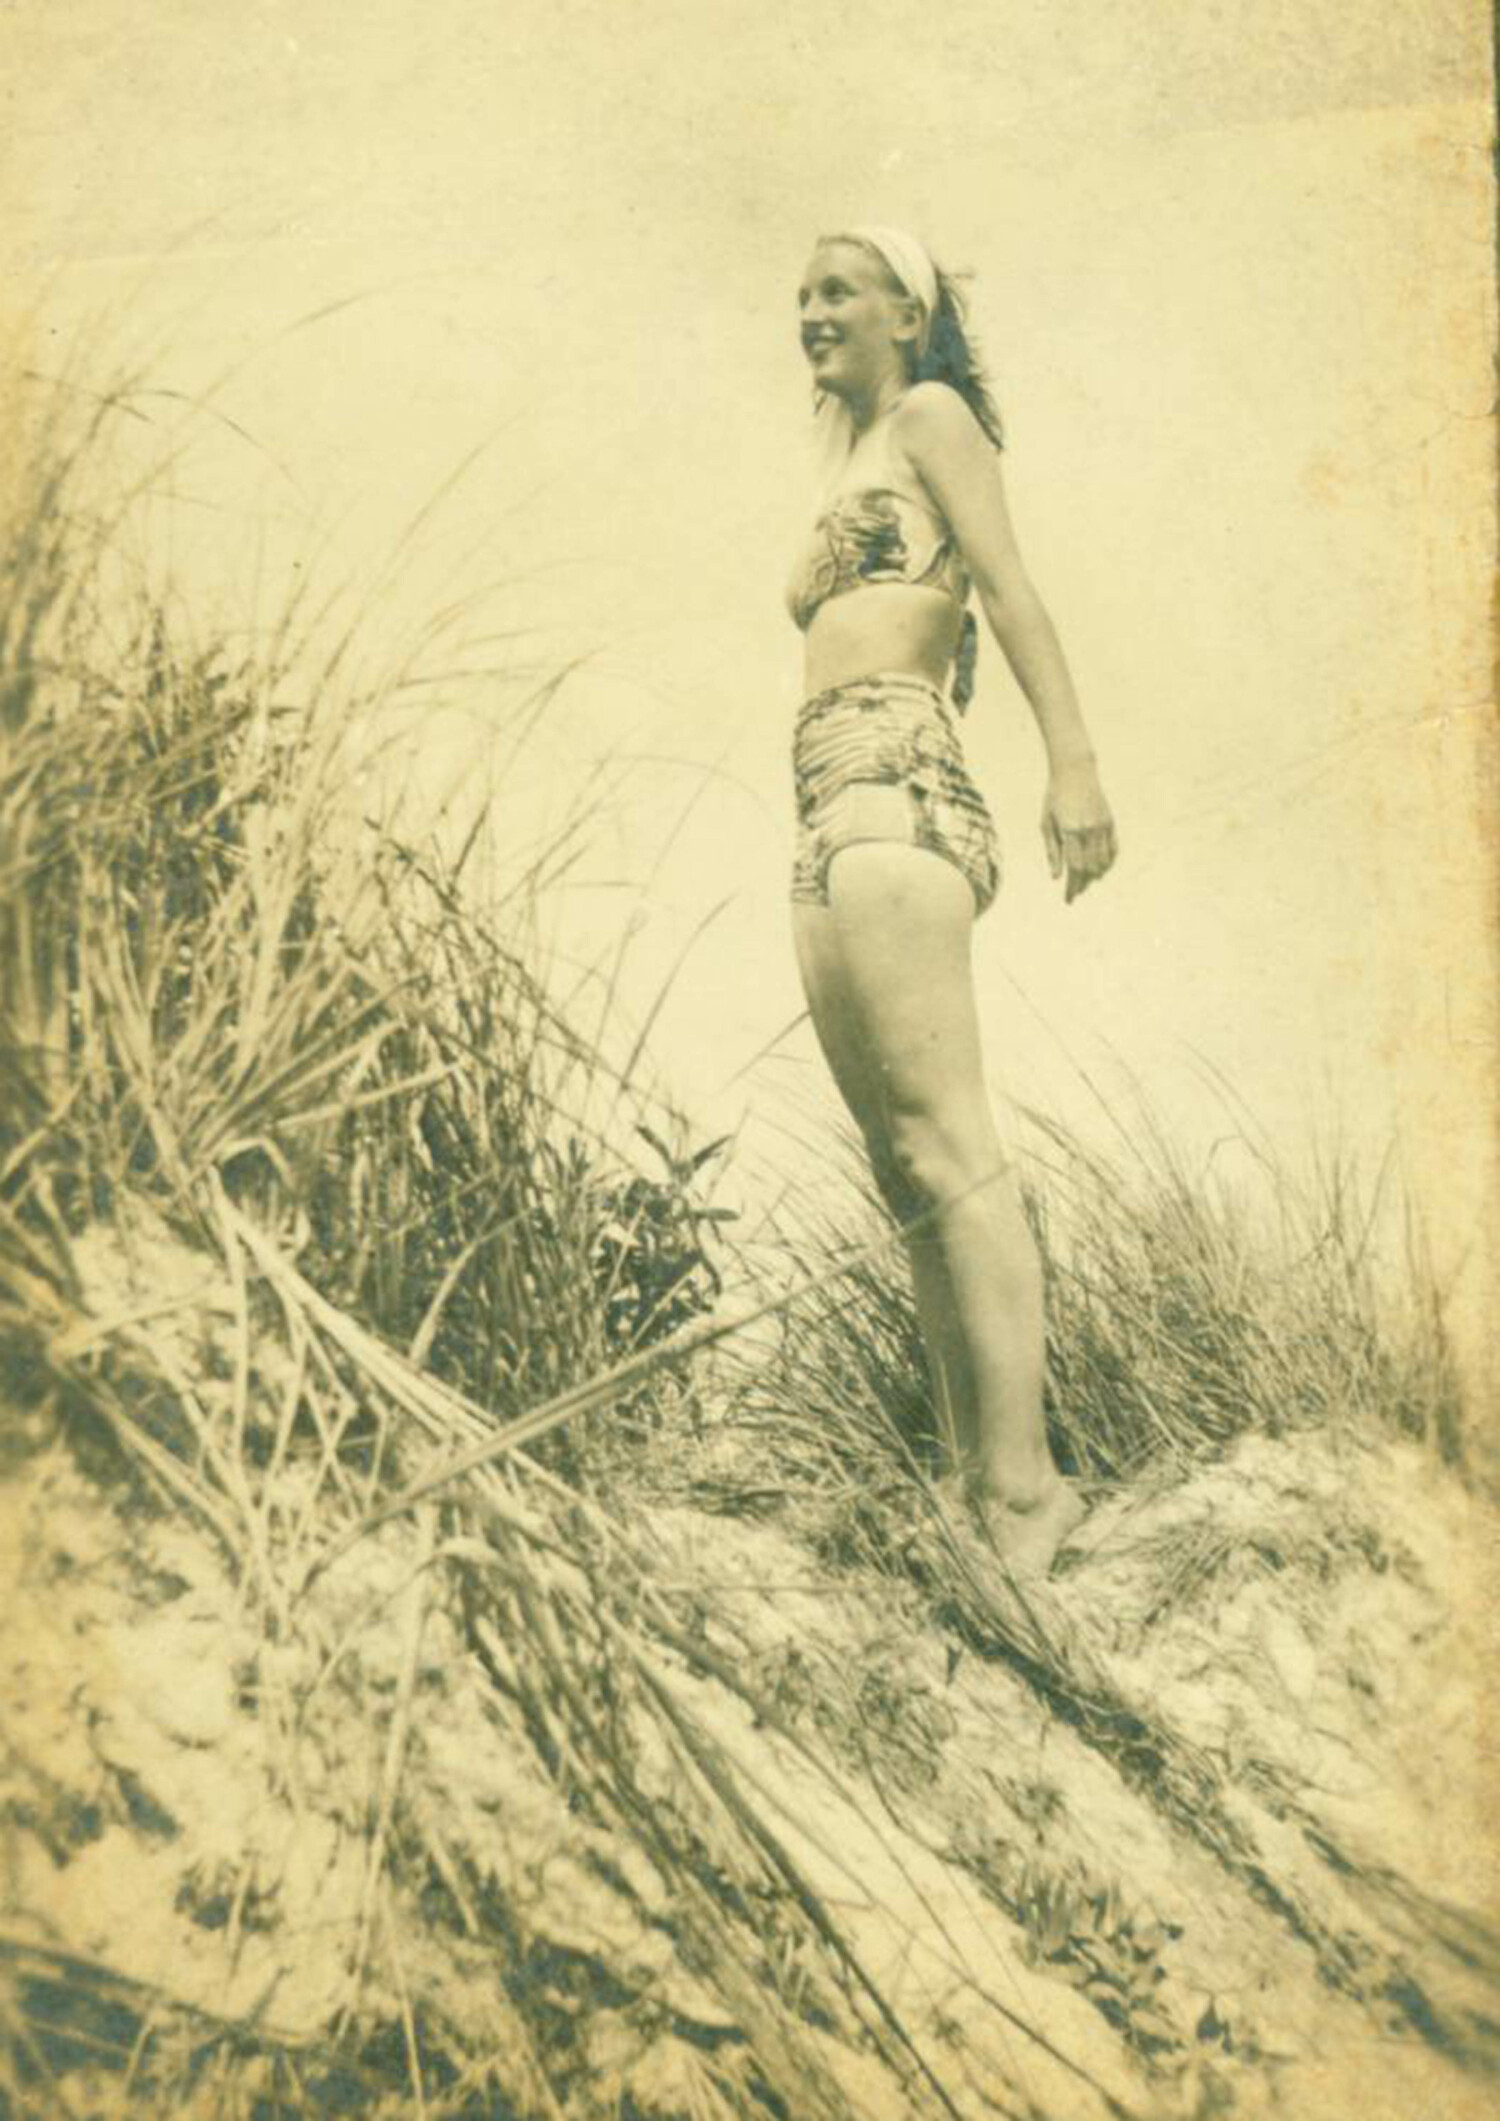 June Morris, just out of high school, on the beach at Fire Island.